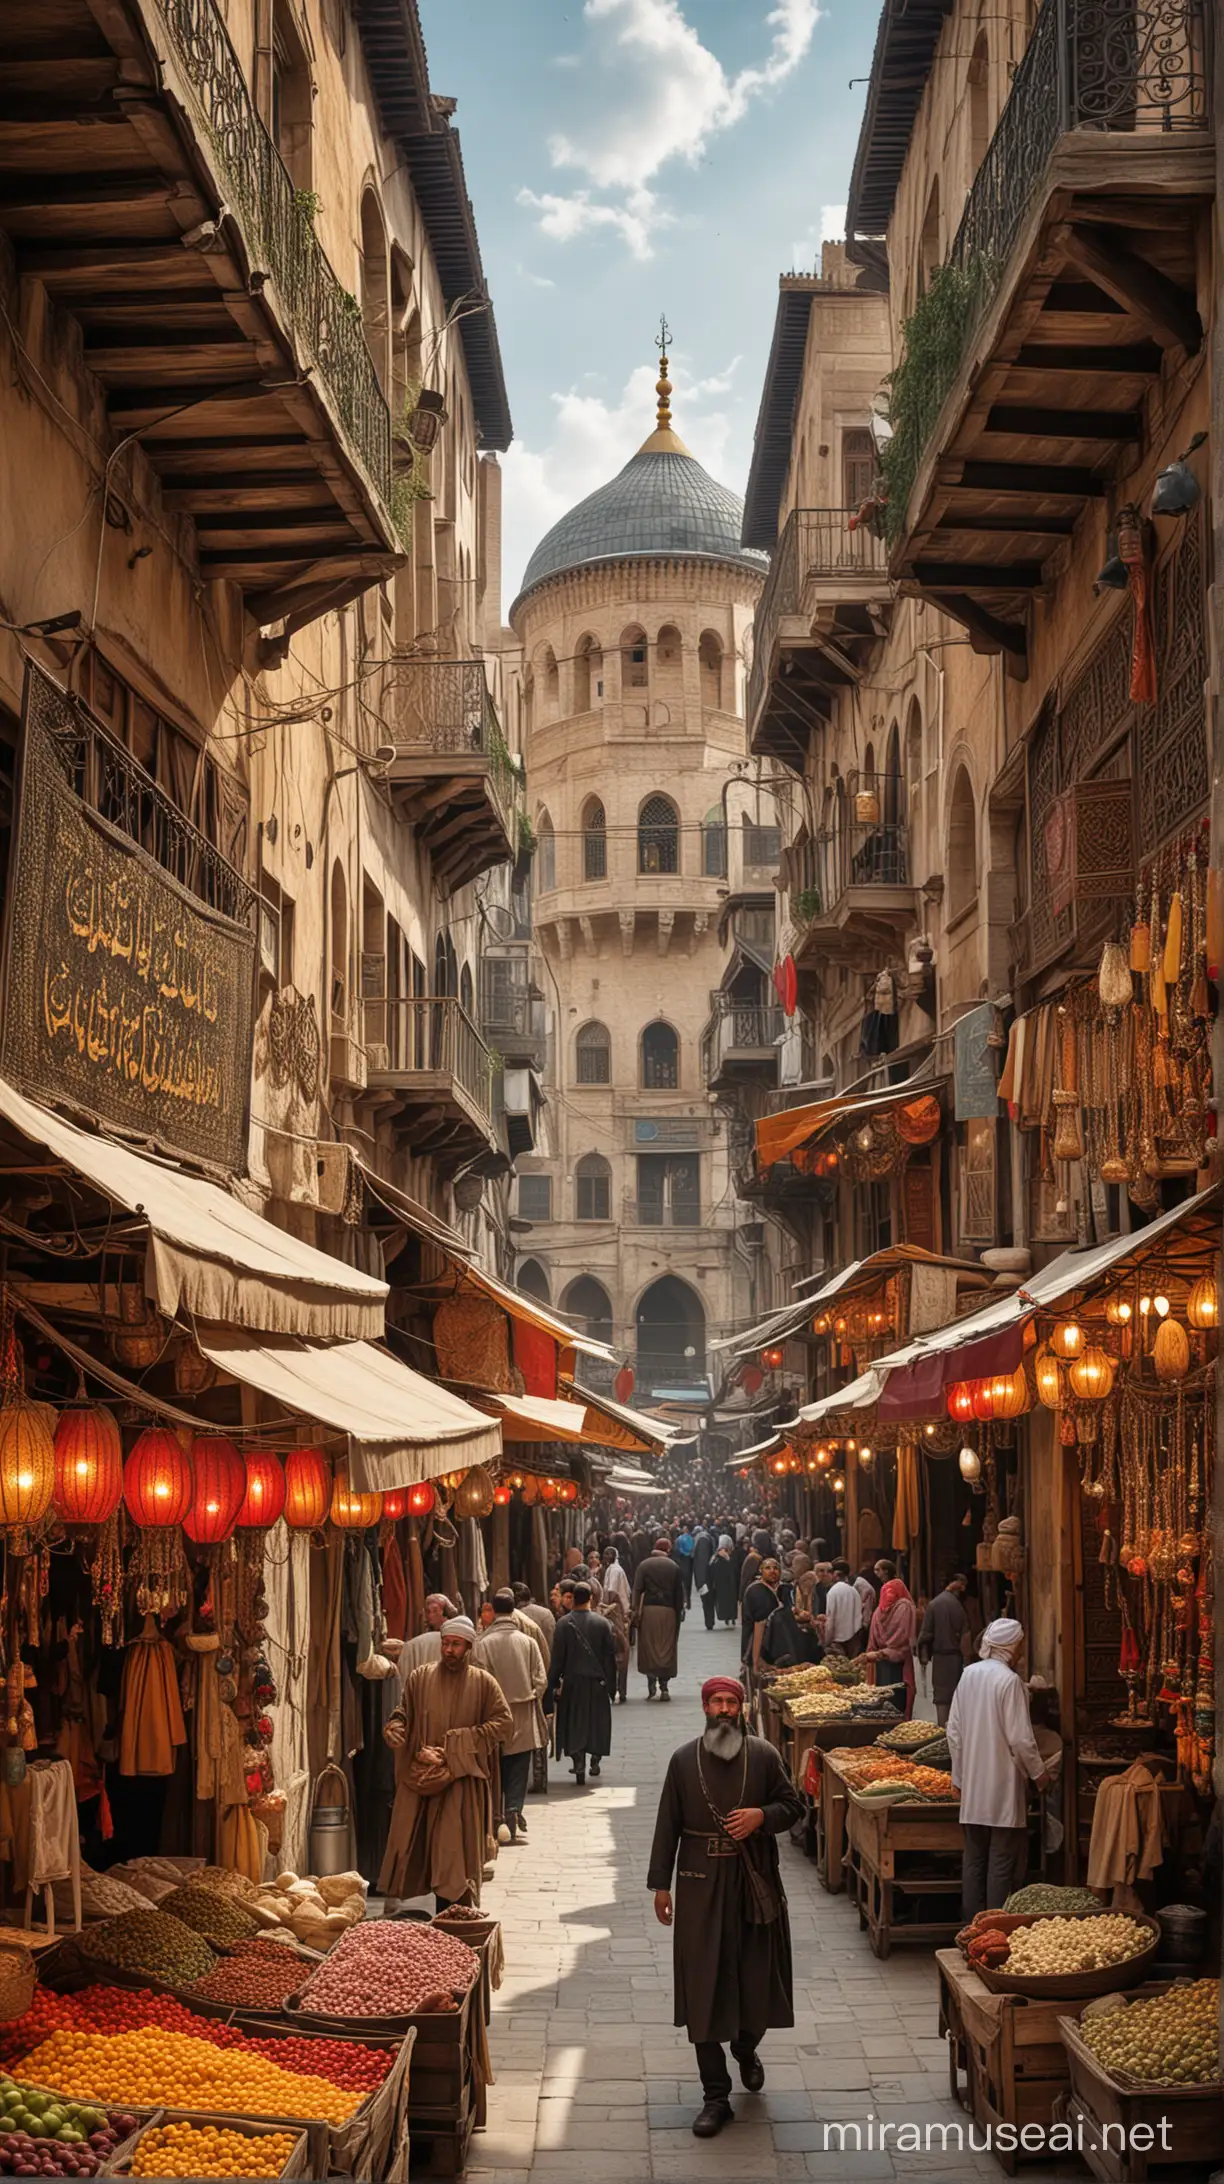 Multicultural Bustling Markets of 17th Century Ottoman Empire